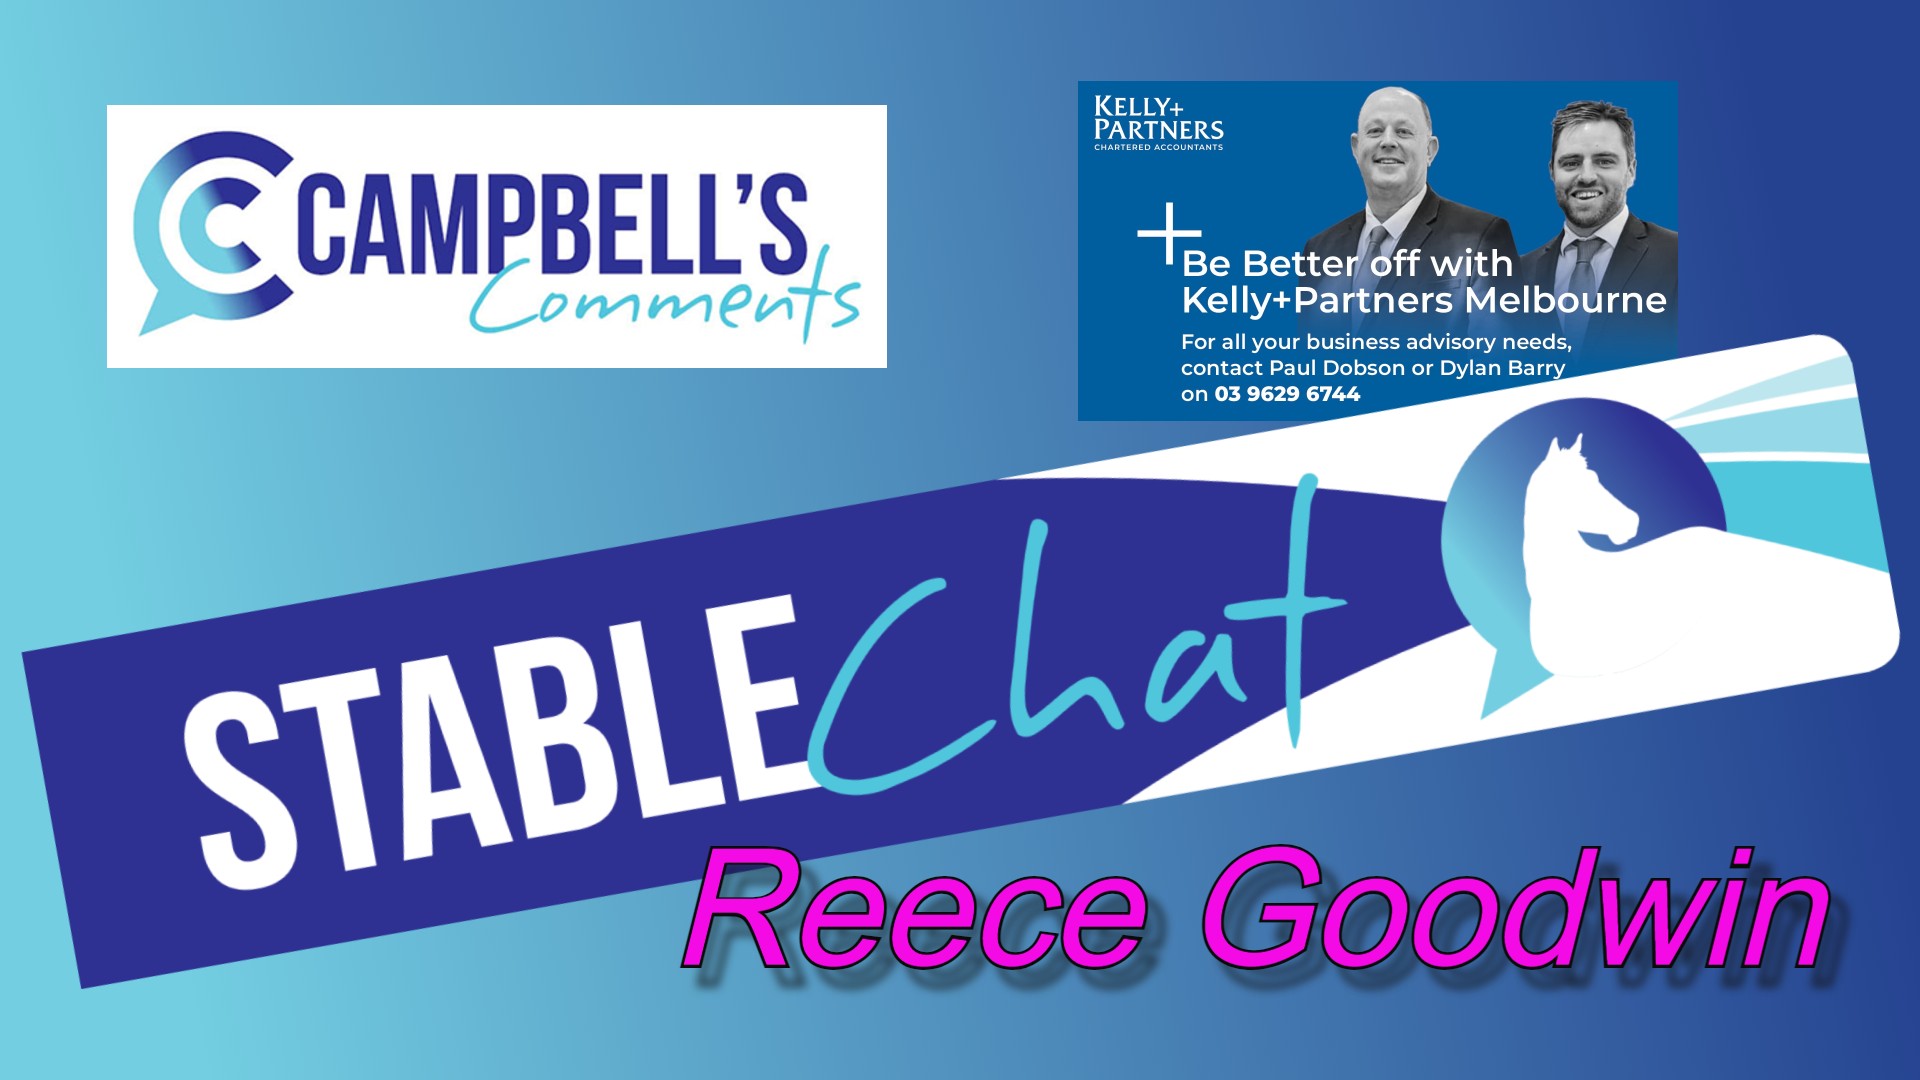 You are currently viewing 69: Stable Chat Reece Goodwin